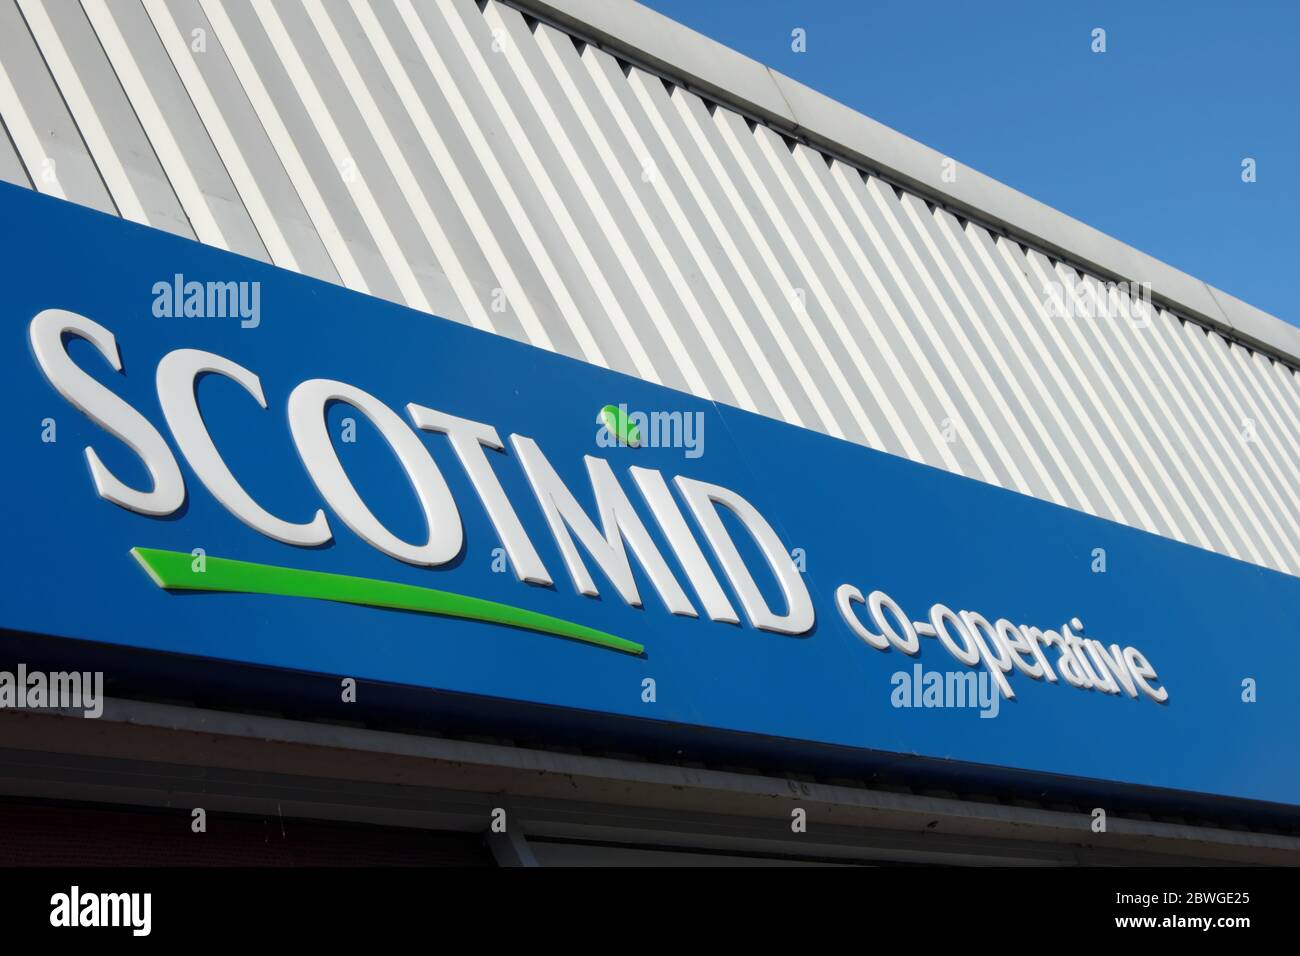 Scotmid logo on a store in Coupar Angus Perthshire Scotland UK Stock Photo